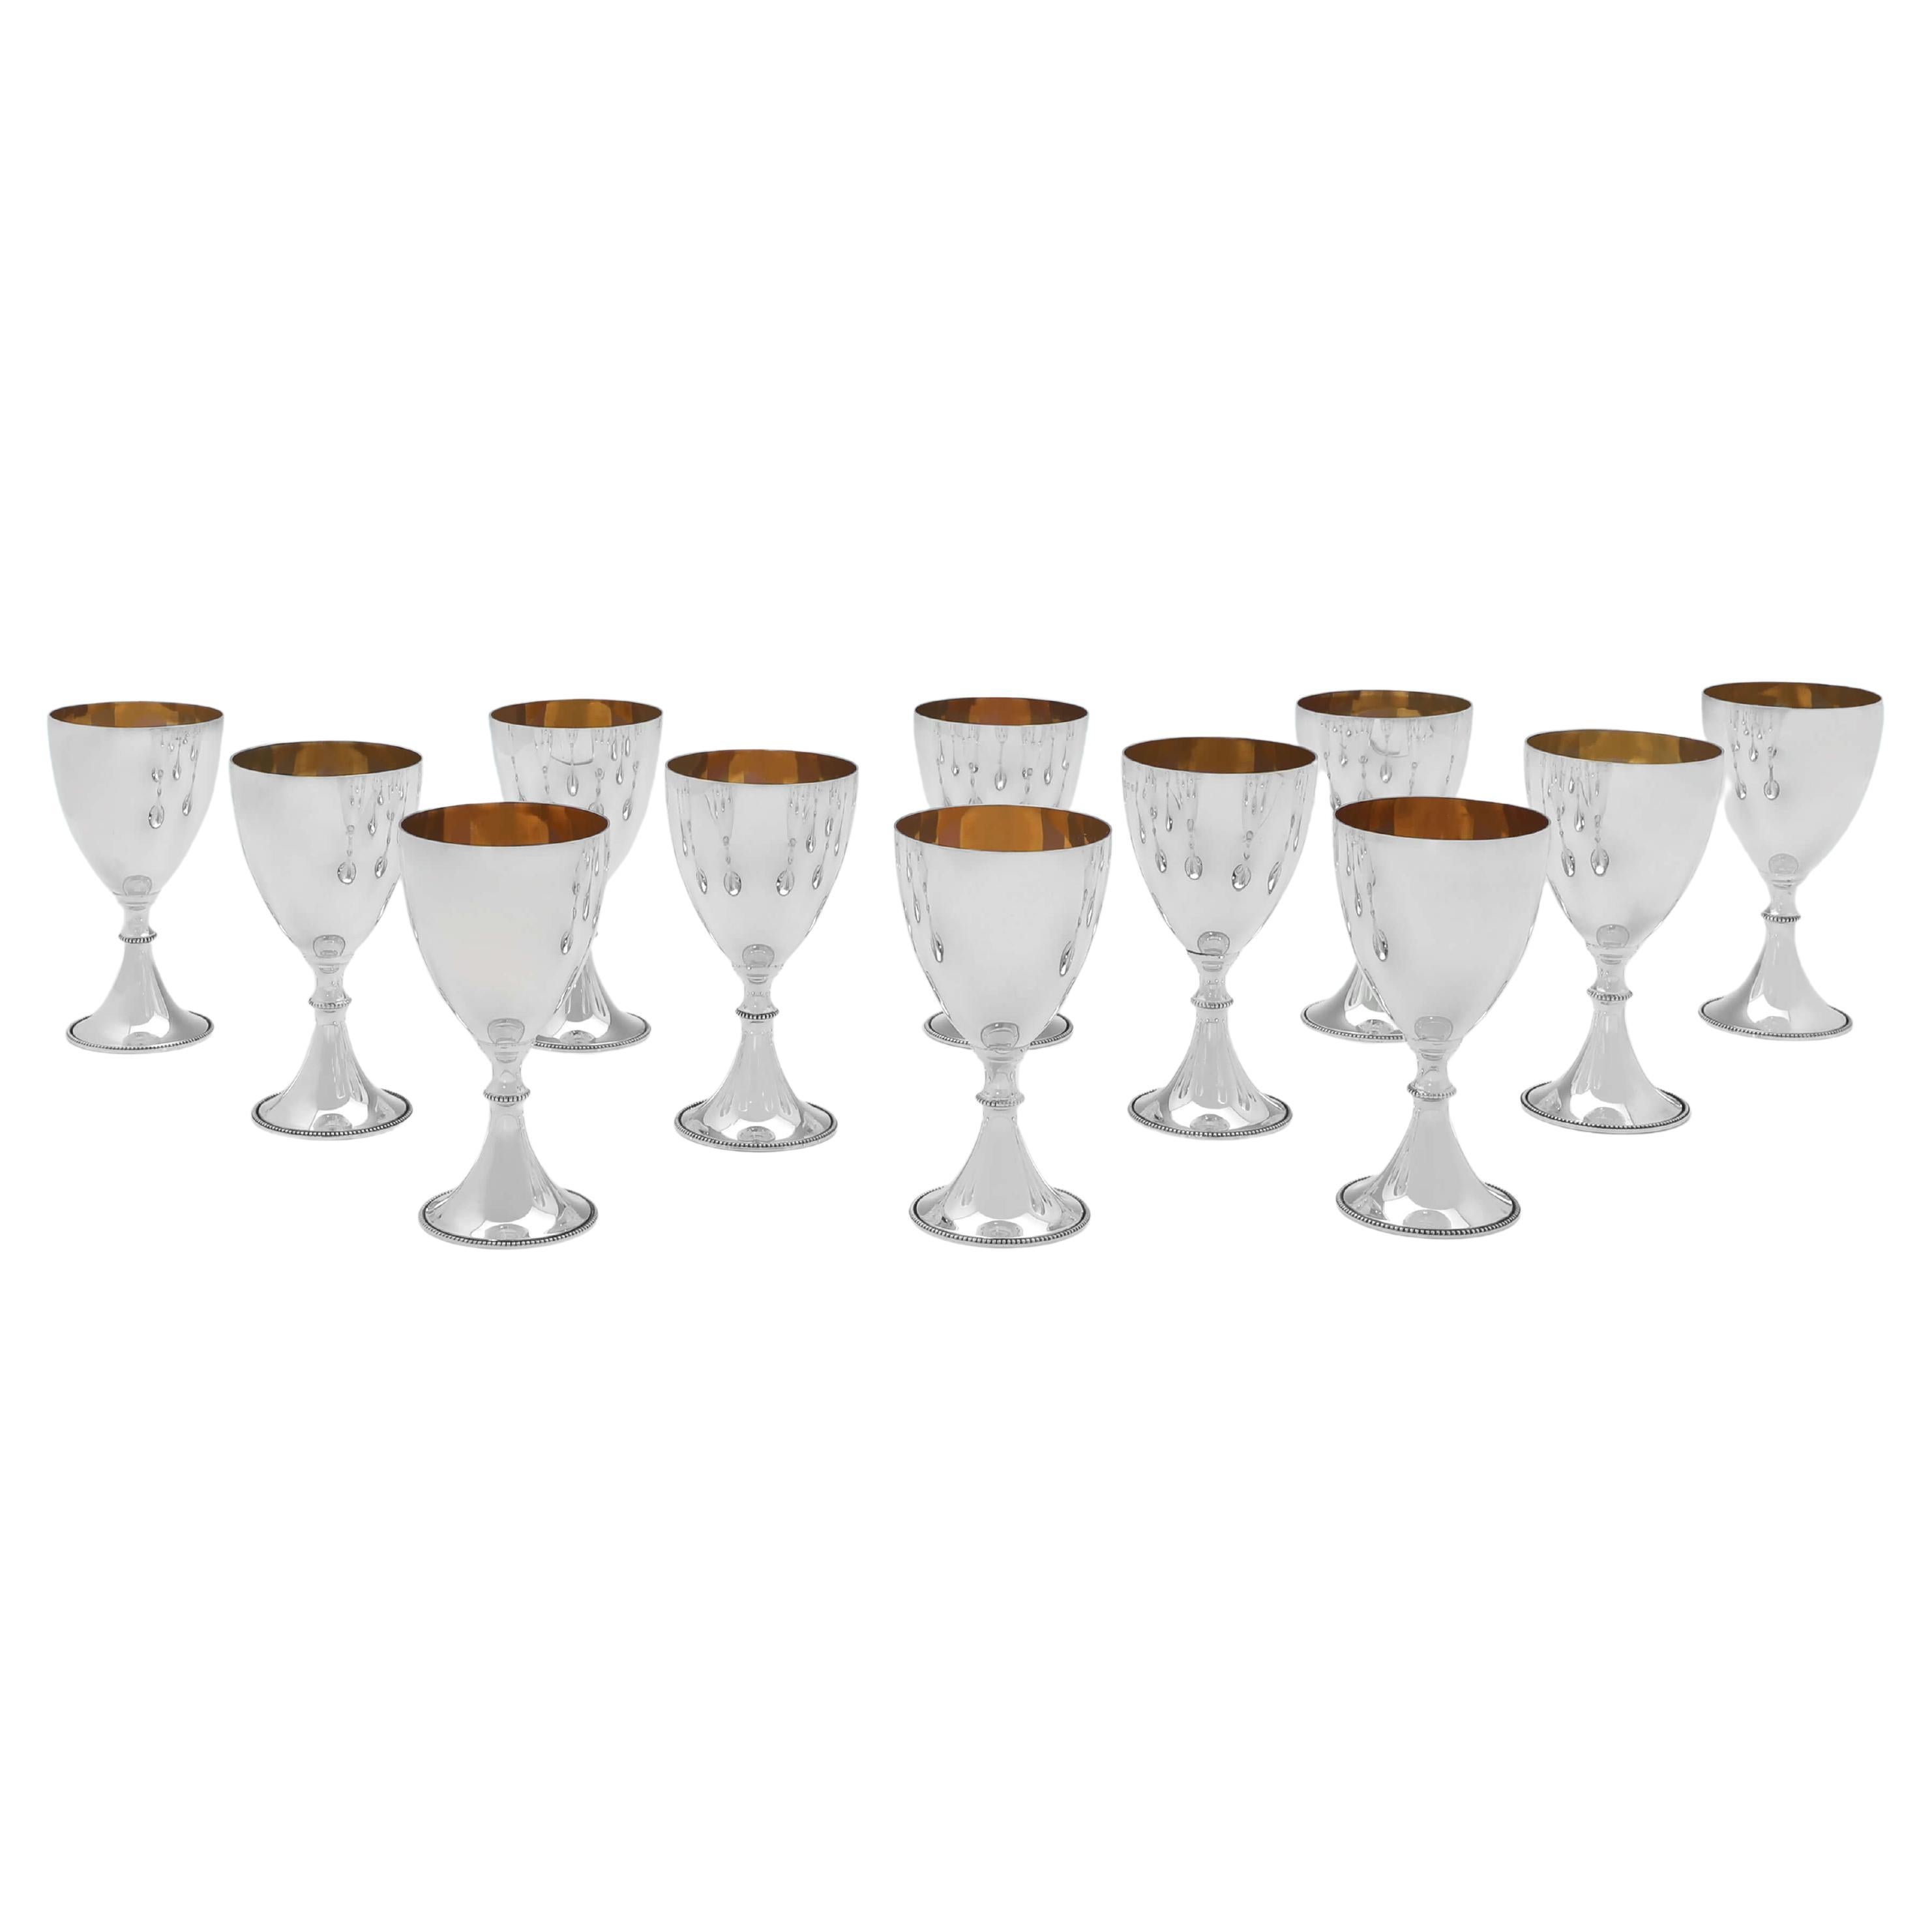 Neoclassical Revival, Sterling Silver Set of 12 Wine Goblets, London, 1971